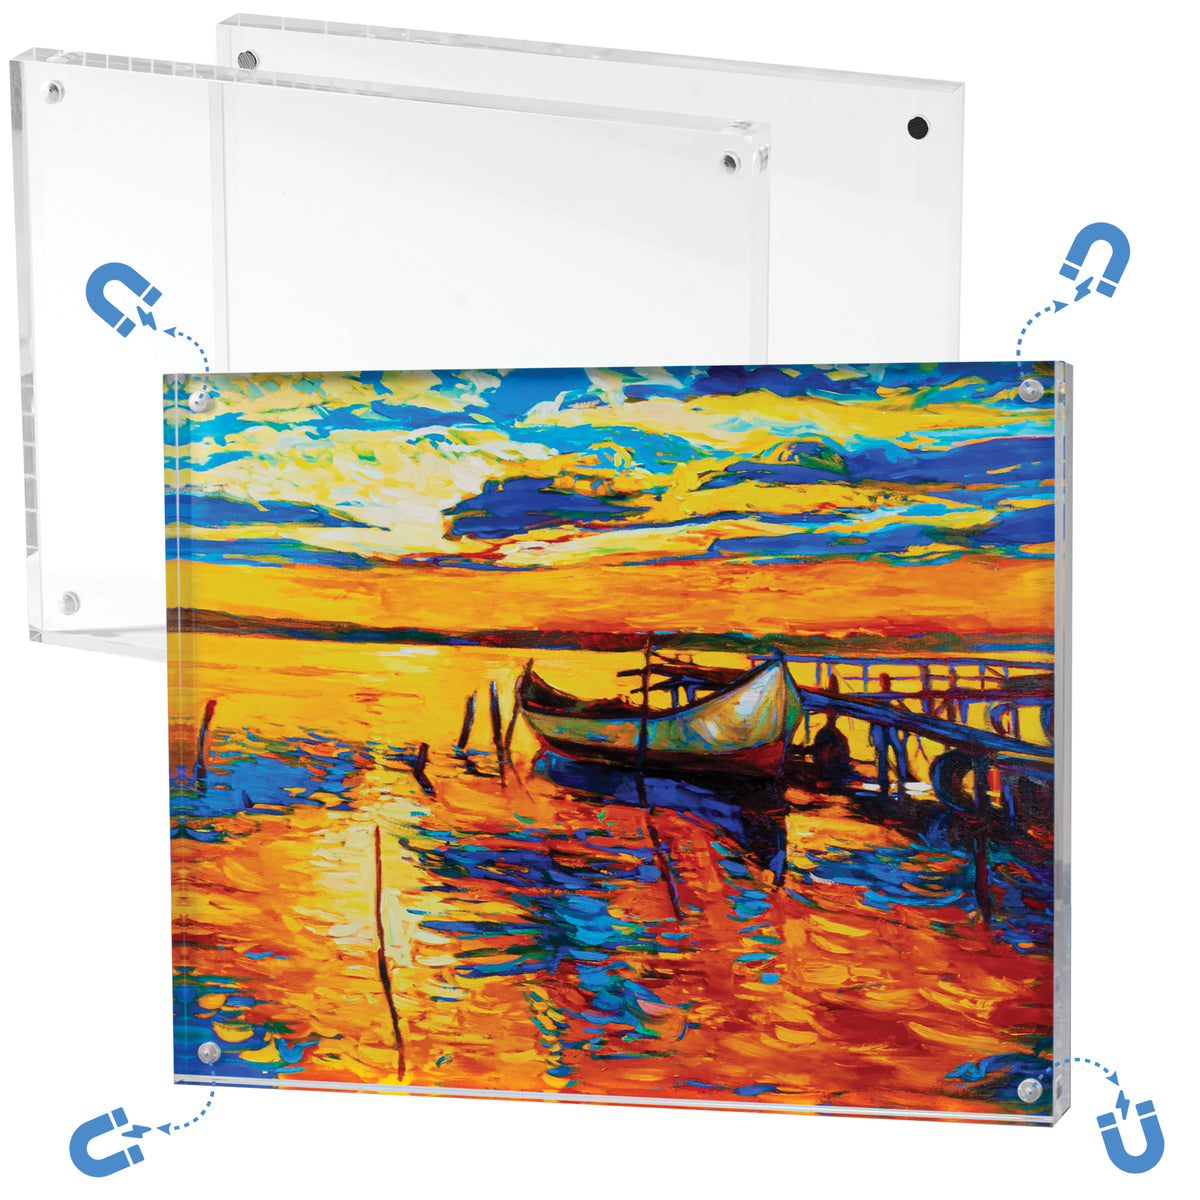 8"x10" Double-Sided Acrylic Magnetic Picture Frame